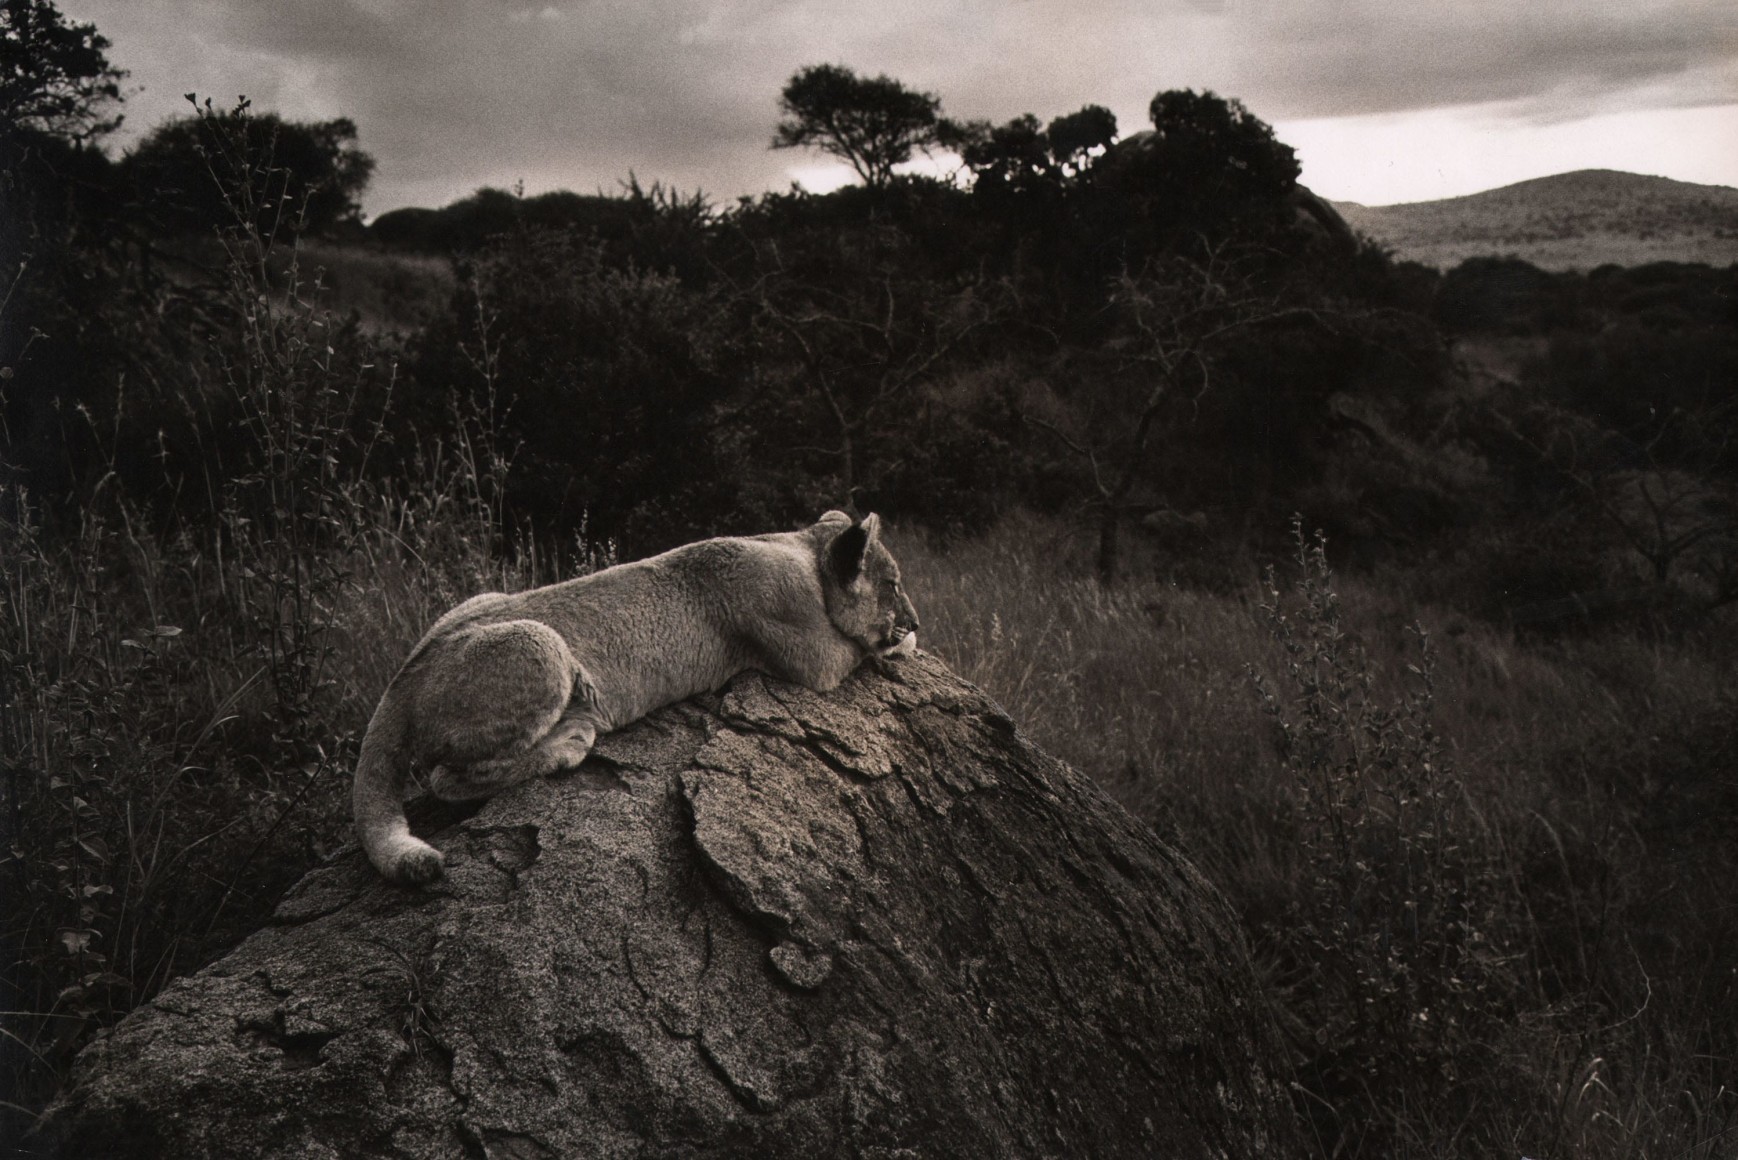 Ken Heyman, Untitled, ​c. 1955&ndash;1960. A lioness rests on a rock, surrounded by grasses, with trees and mountains in the background.